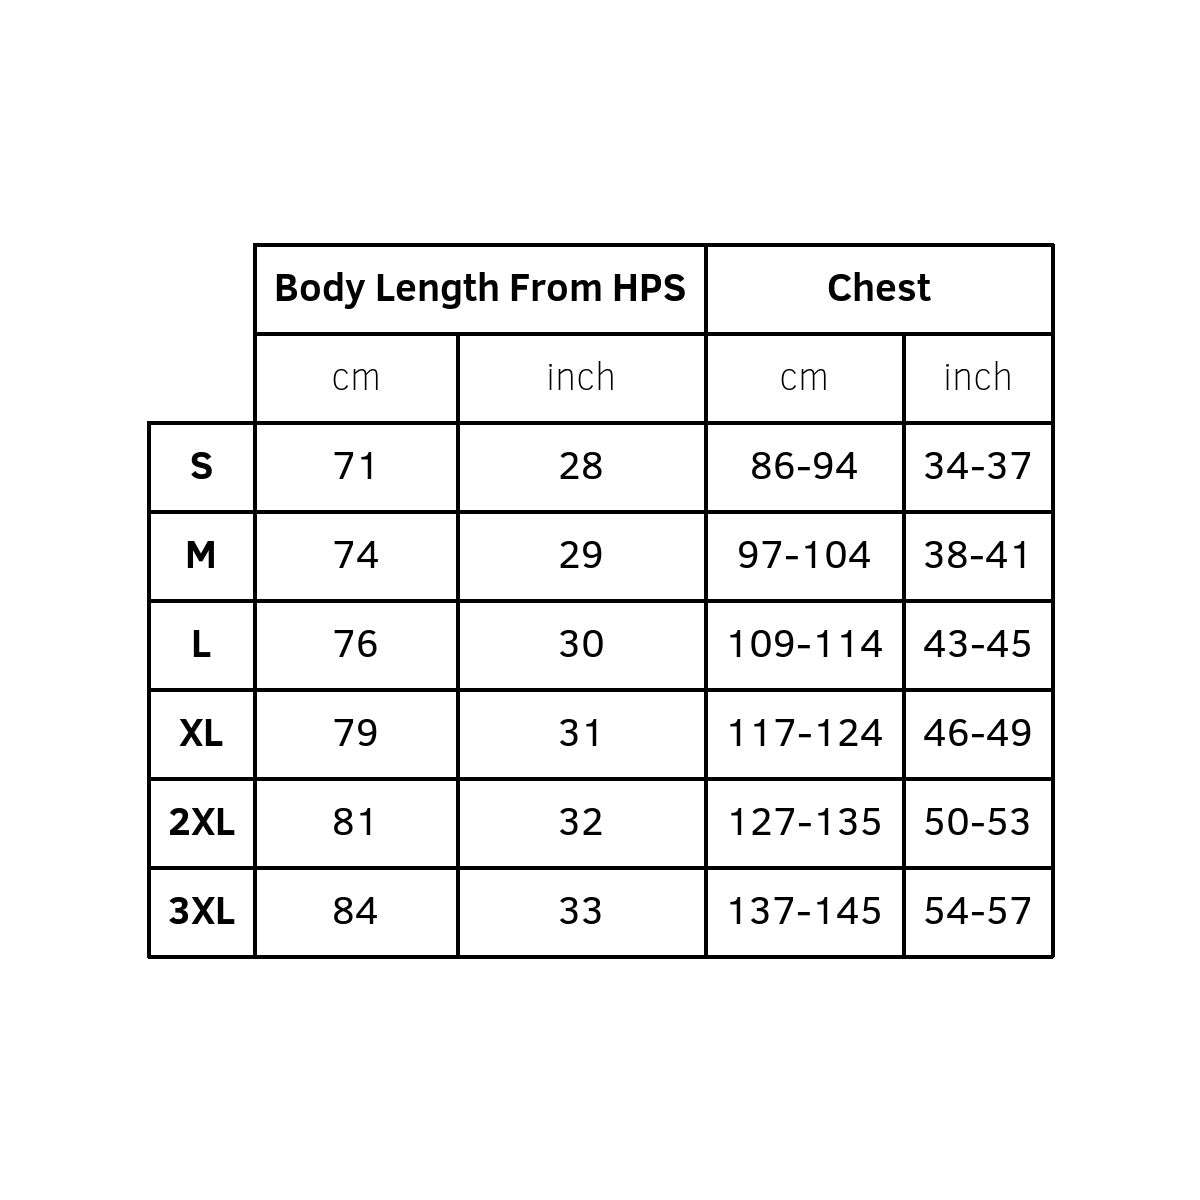 Sizing chart for crew neck short sleeve unisex t-shirts ranging from small to 3XL.